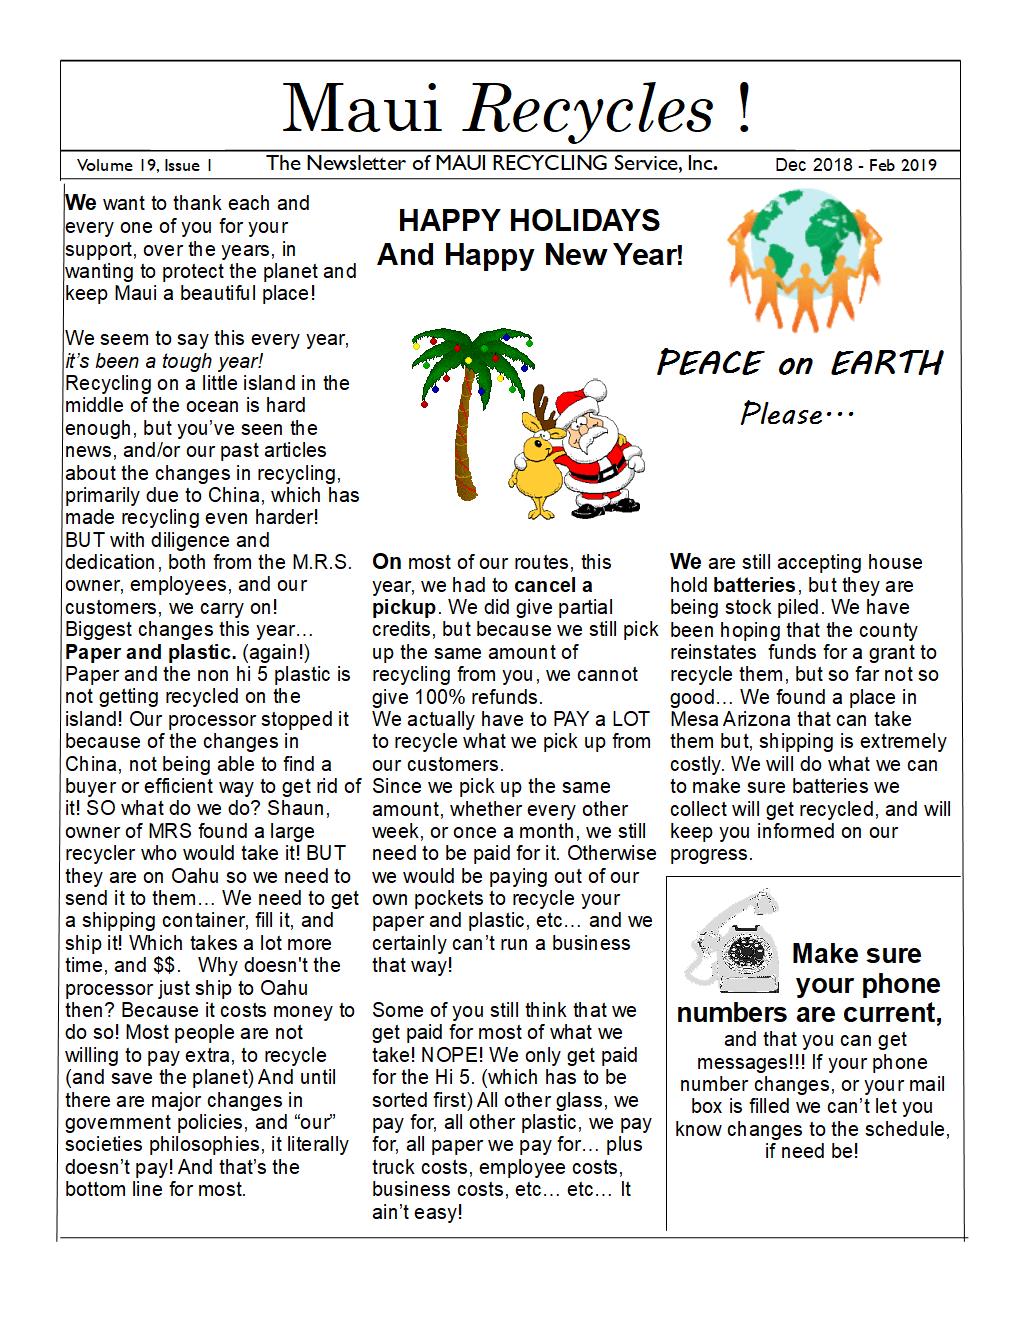 Maui Recycling Service Newsletter